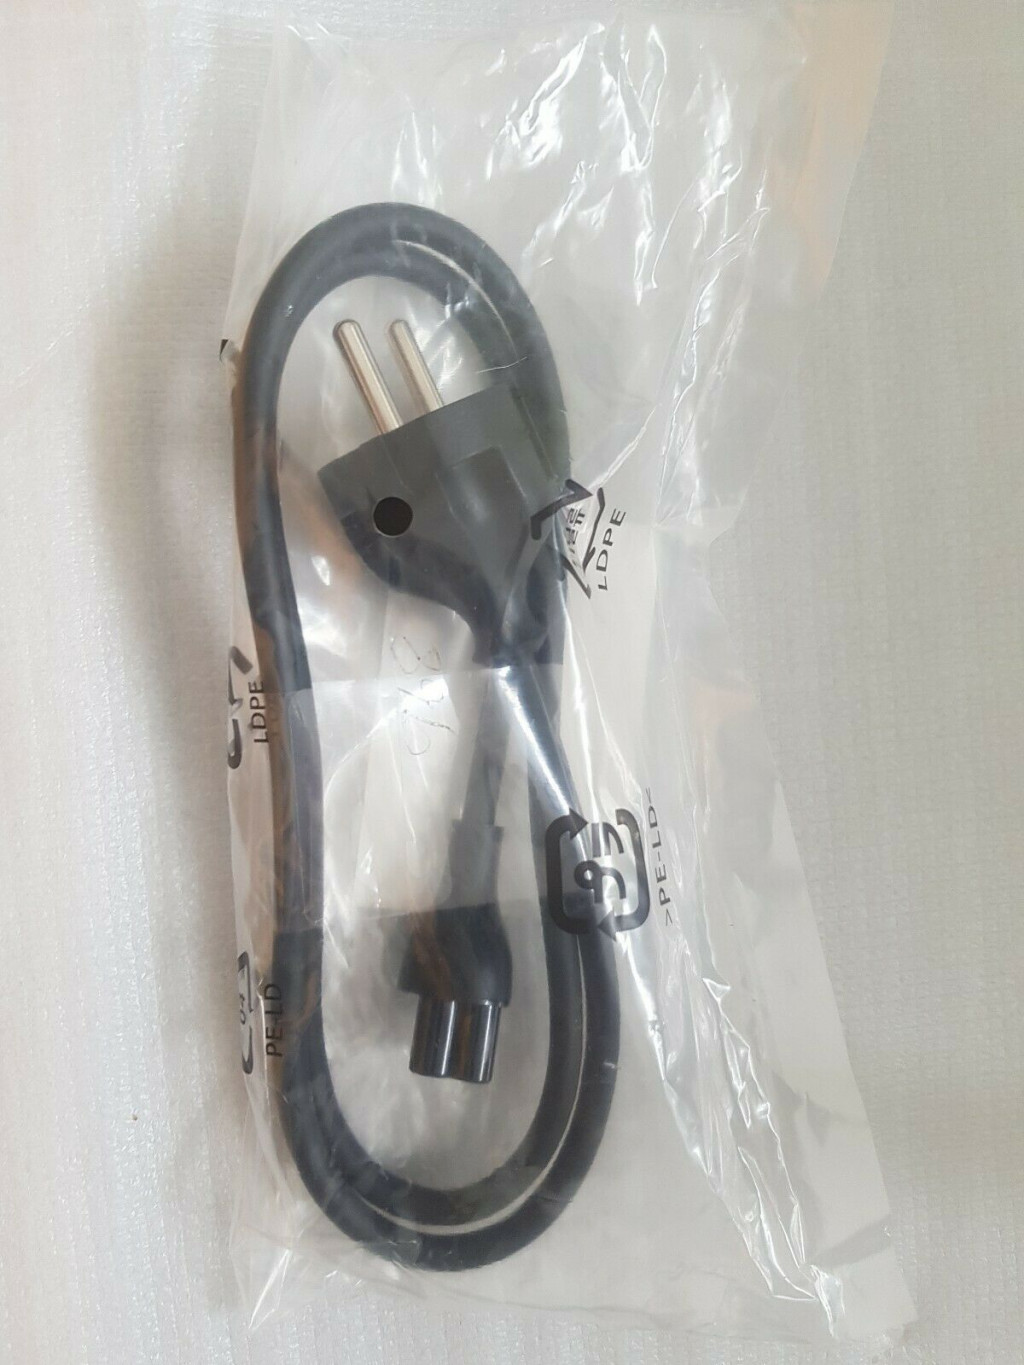 Dell AC power cable (AC power cord) Dell 06GDYJ, CEE 7/7 (SCHUKO) connector to IEC C5 (3-pin, cloverleaf, Mickey Mouse) connector, 0.9m